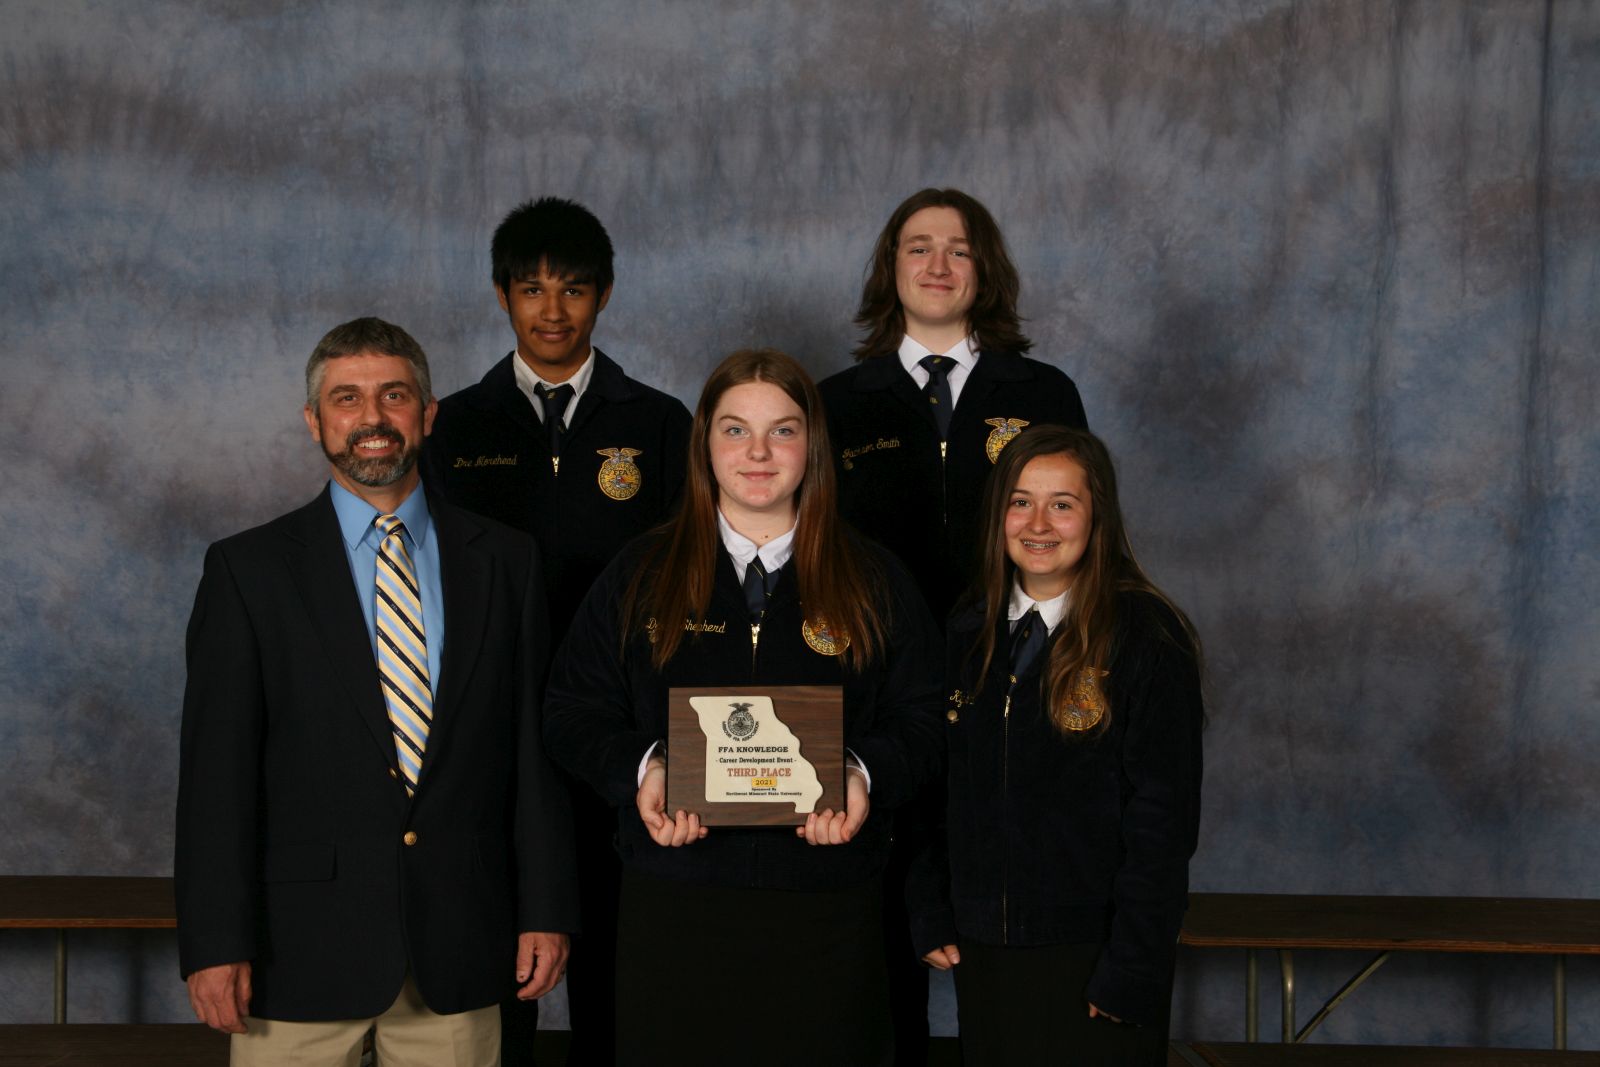 knowledge team places third in state competition